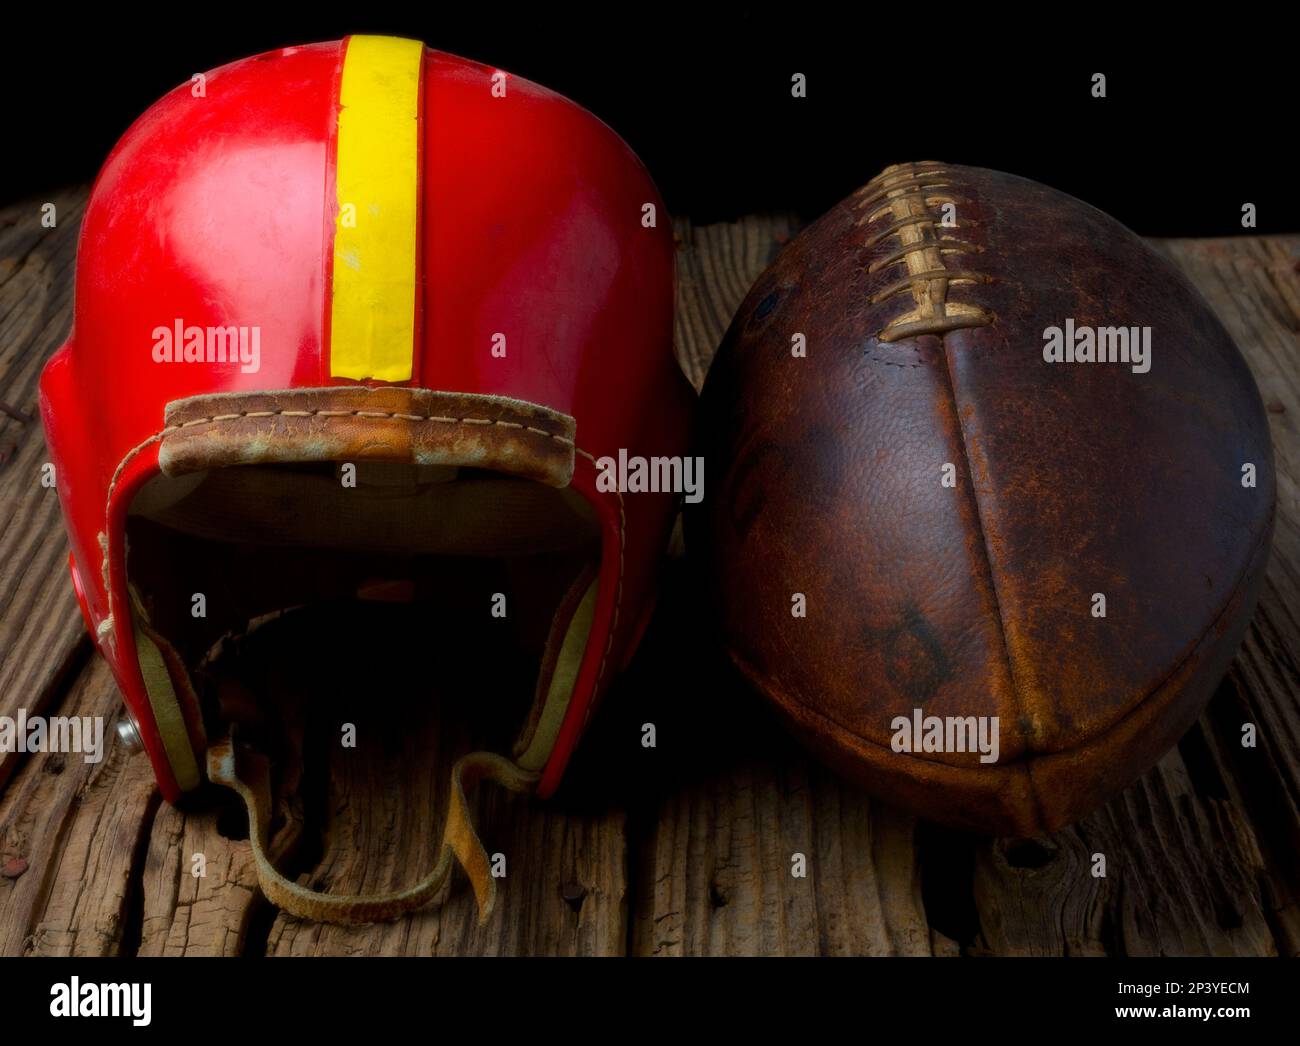 Pour The Love of football STILL Life Banque D'Images